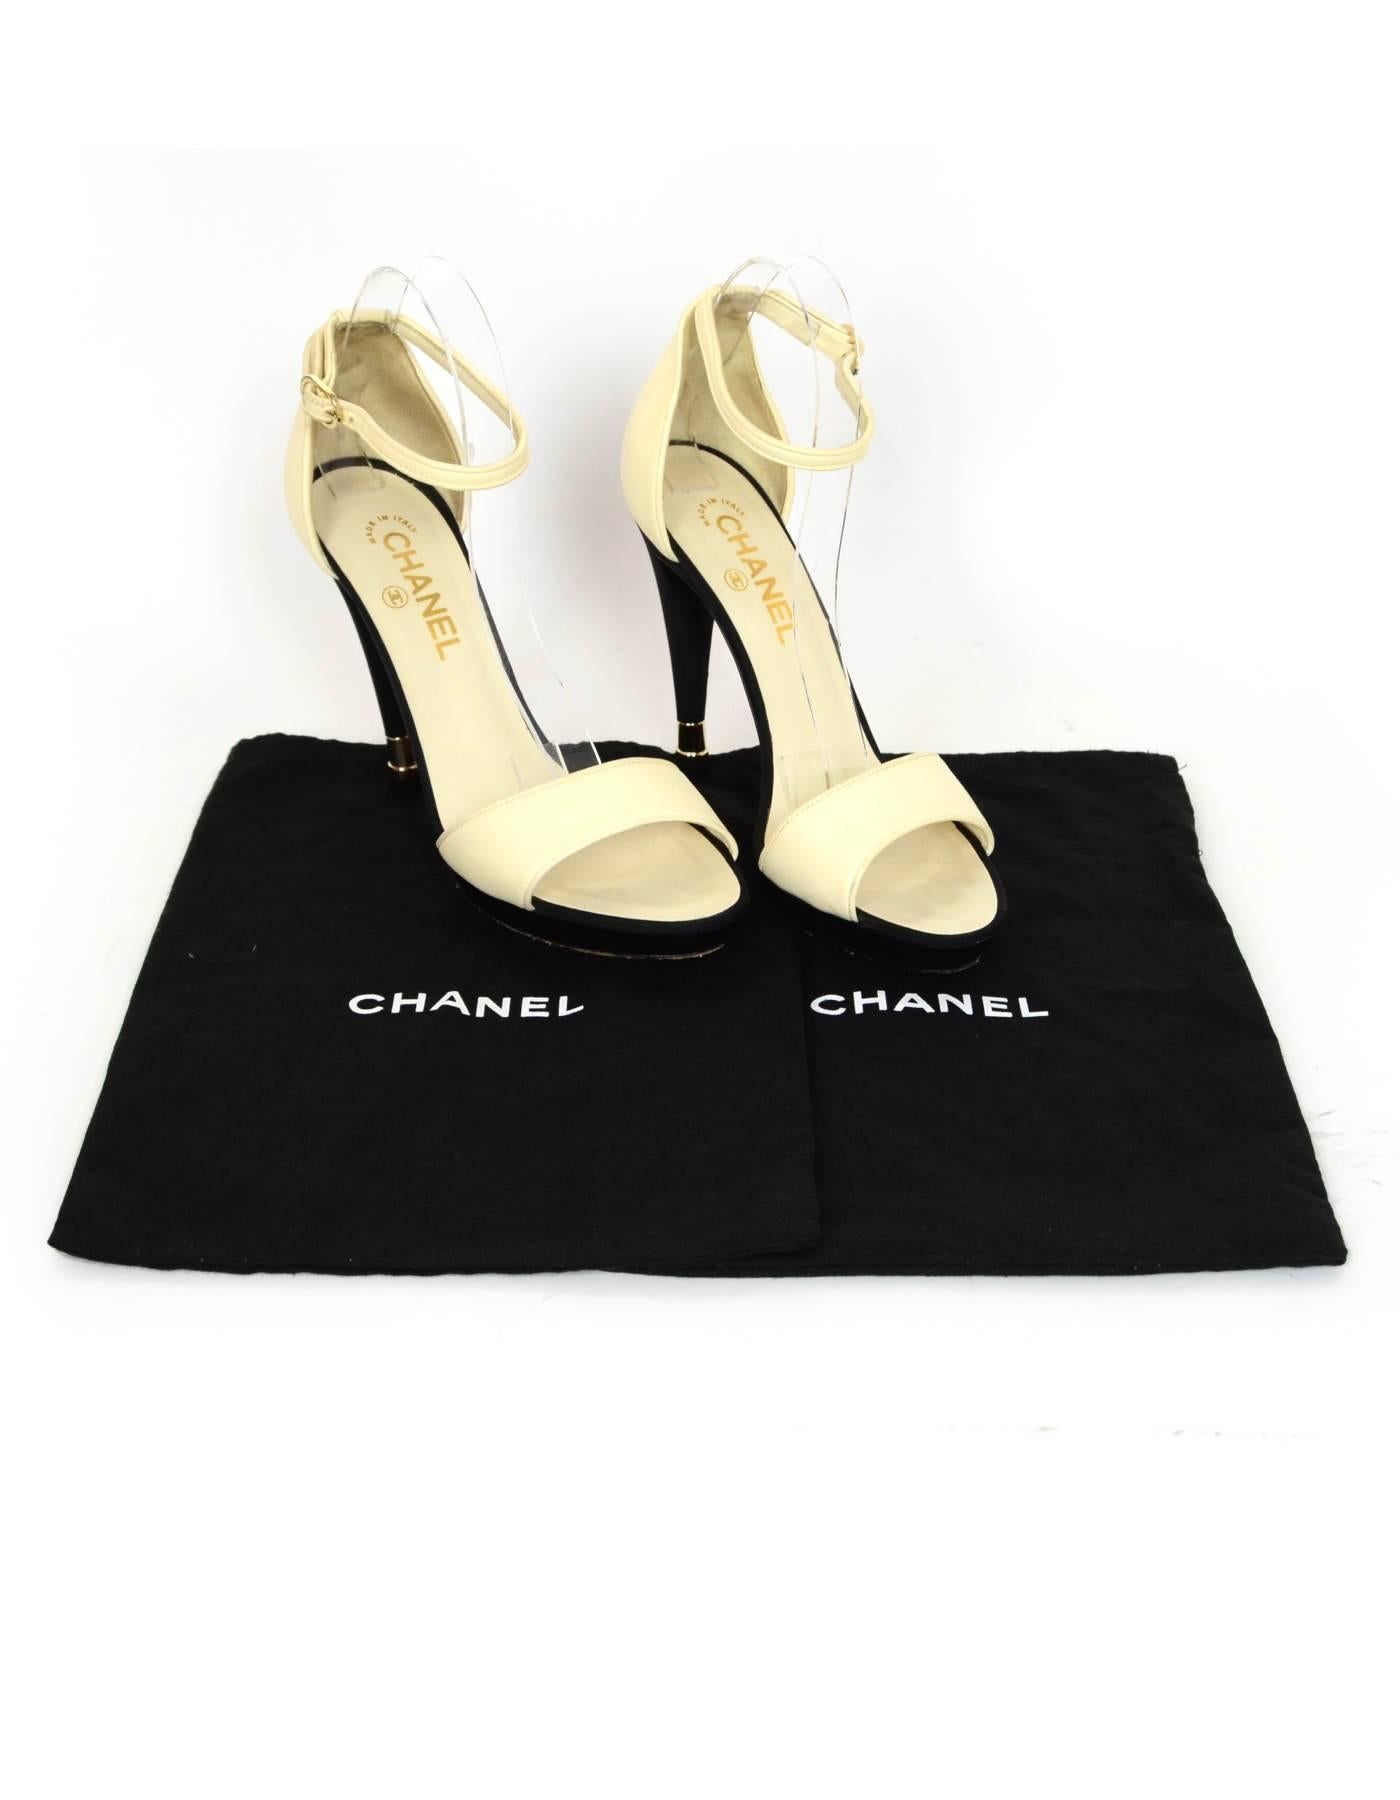 Chanel Black Grossgrain & Ivory Leather Sandals Sz 39.5 with DB 1